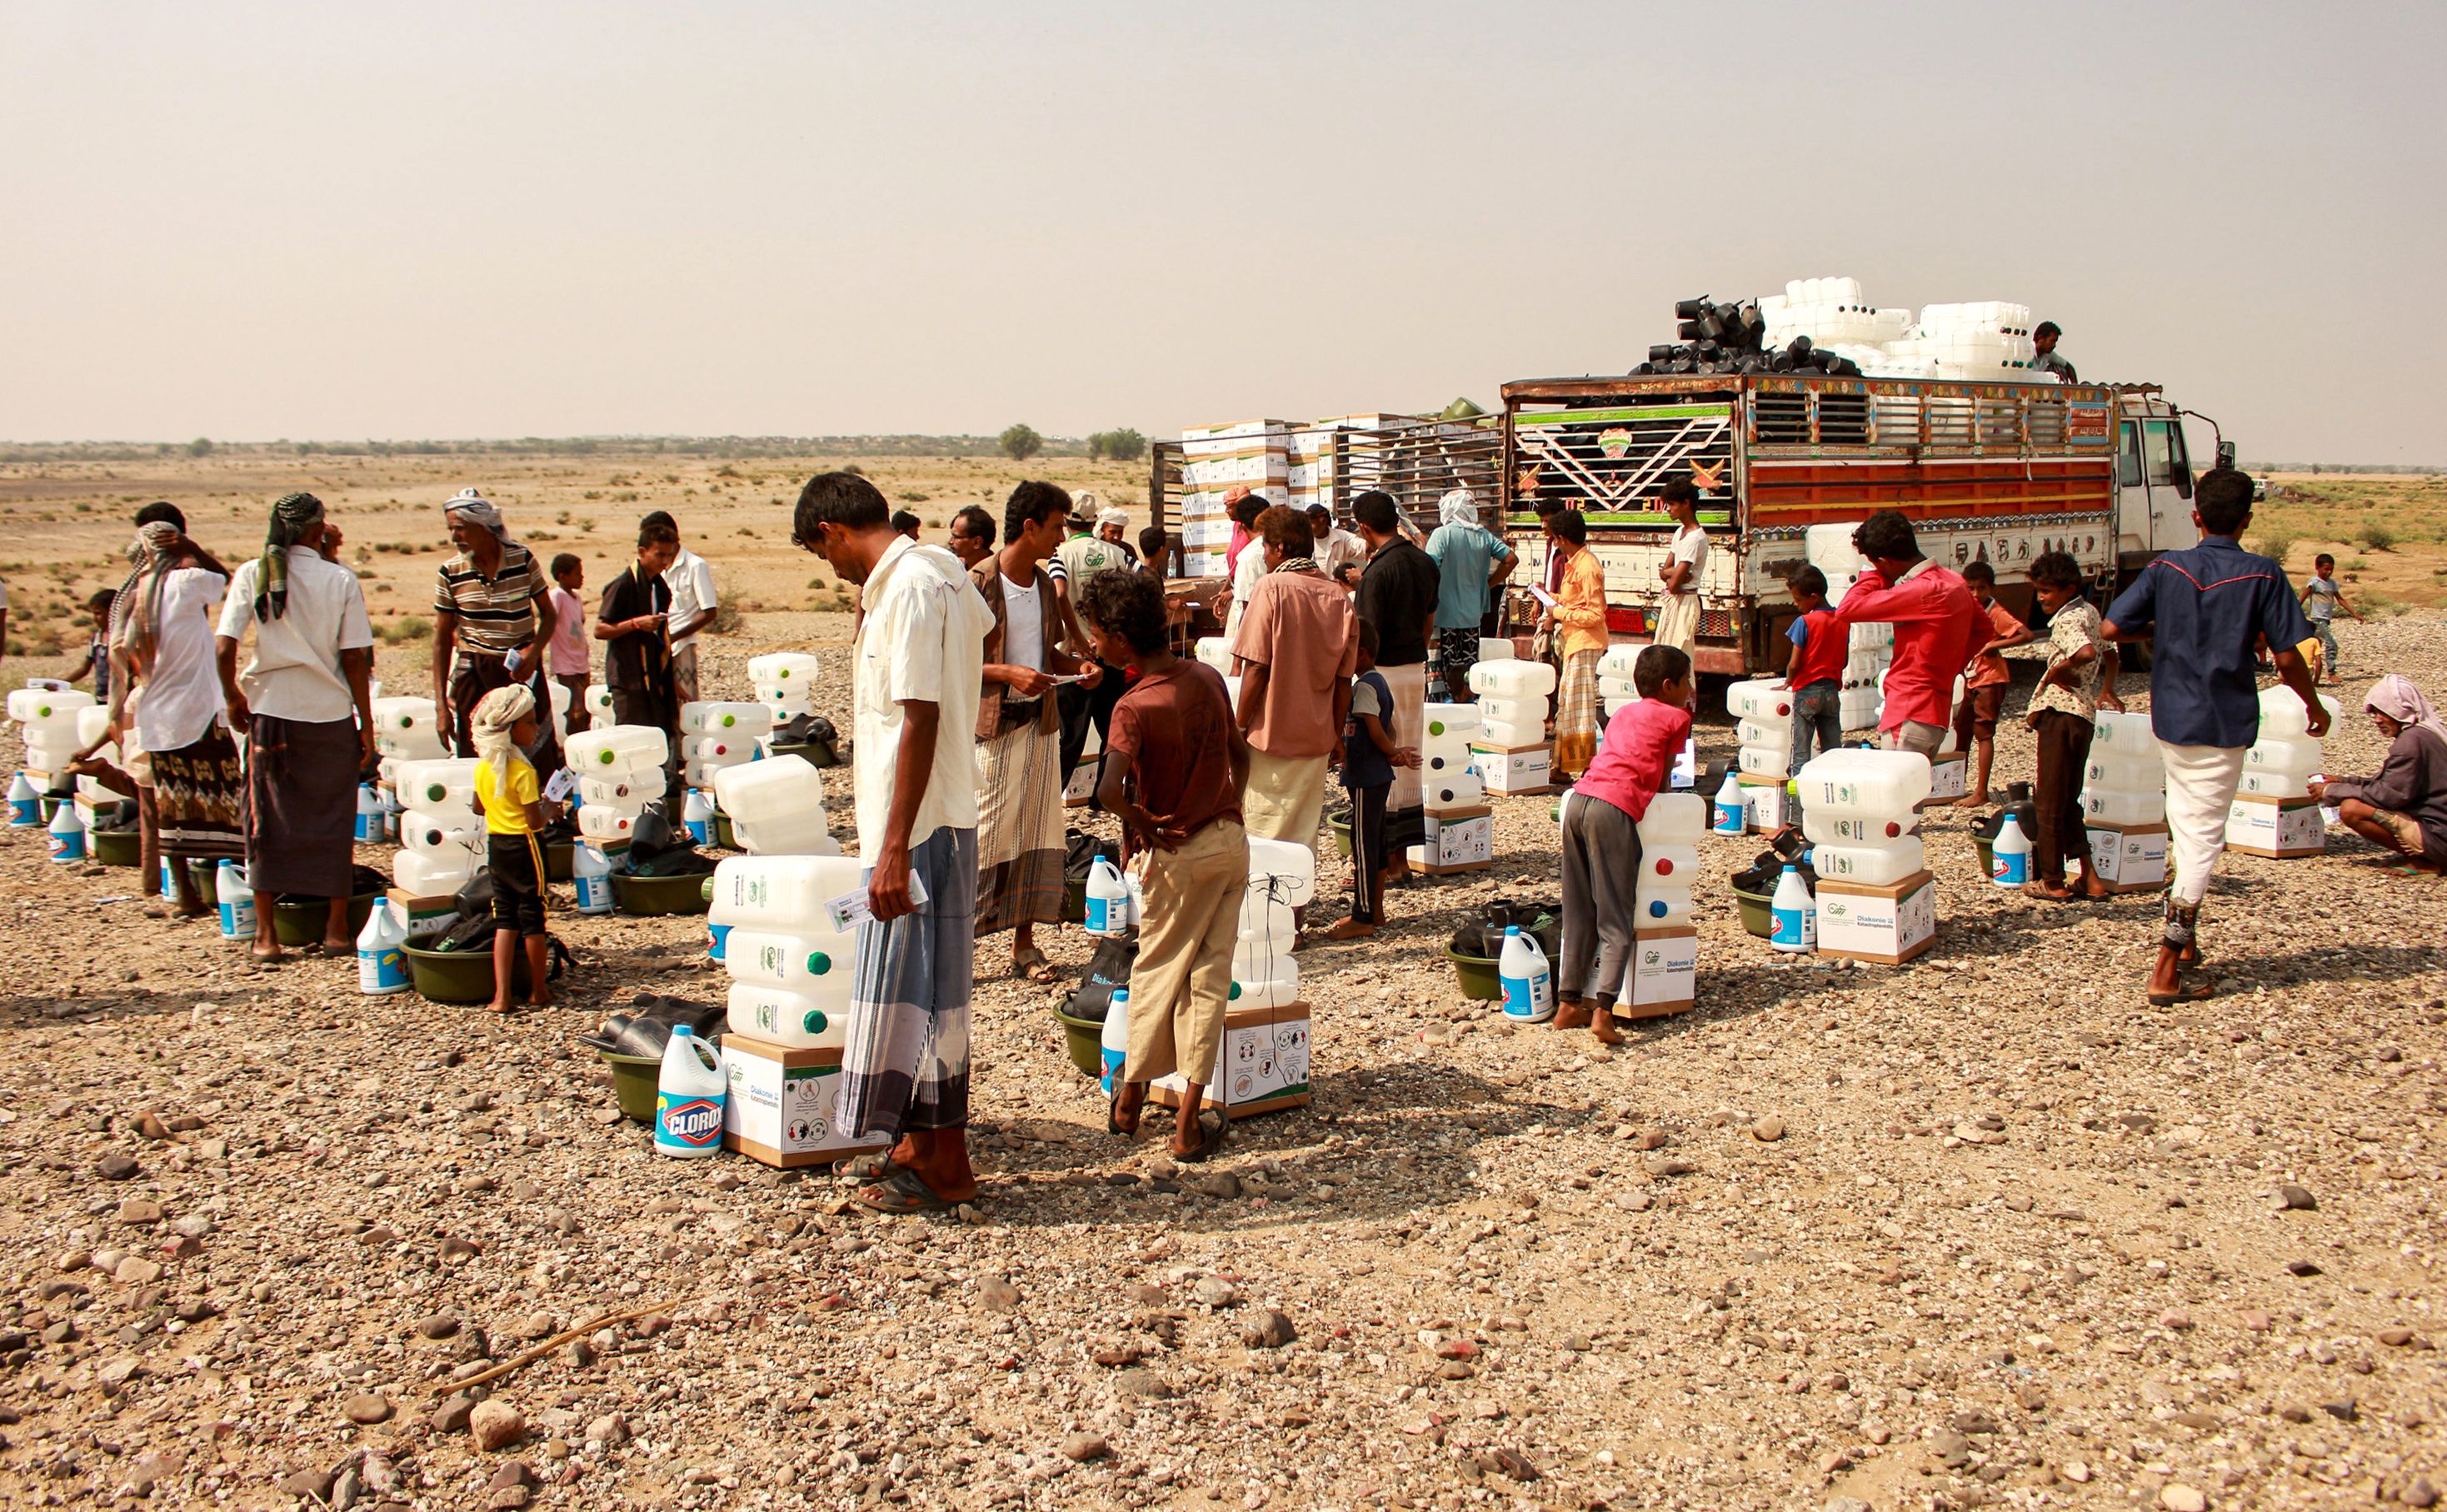 Yemenis displaced by the civil war receiving aid